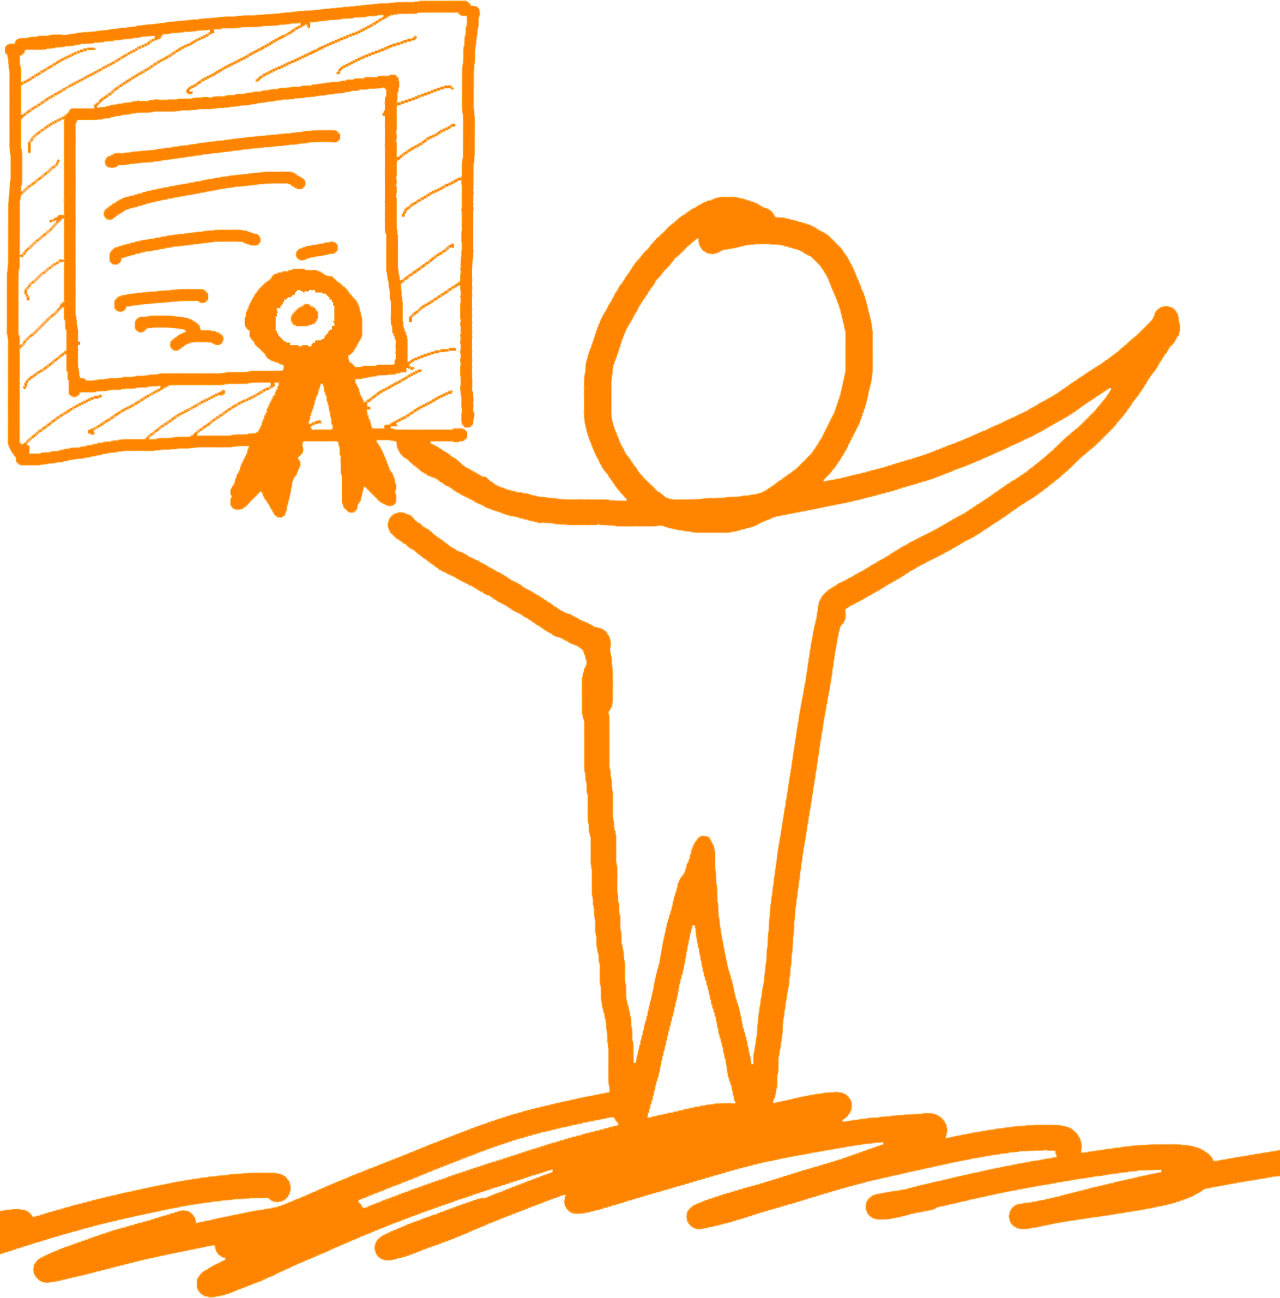 An illustration showing a person proudly holding their Shift Positive certification. The individual is depicted holding the certification document in their hands, symbolizing successful completion of the training program and their commitment to positive leadership principles.